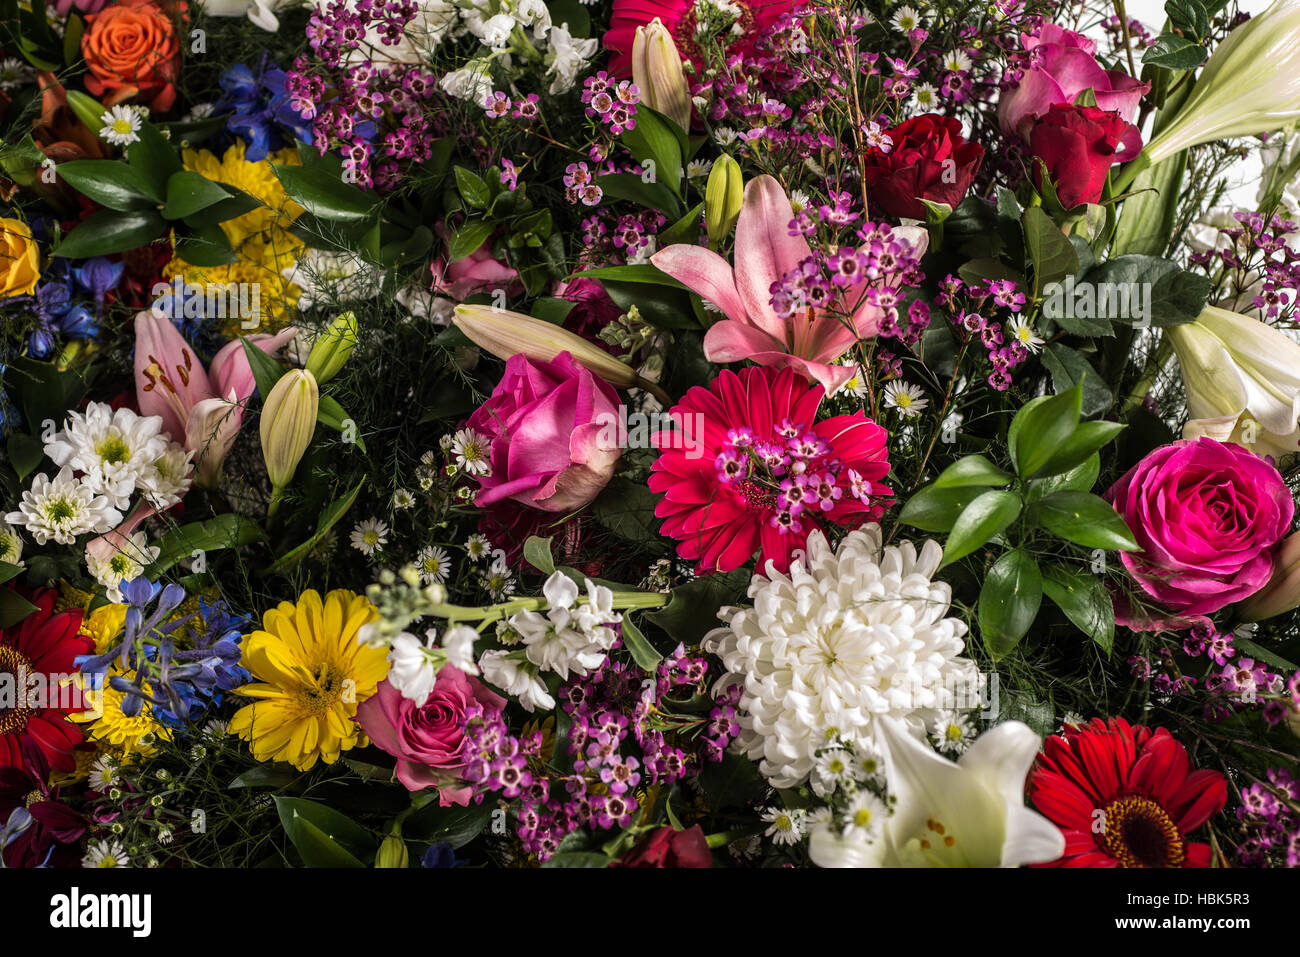 Mixed bunch of flowers Stock Photo